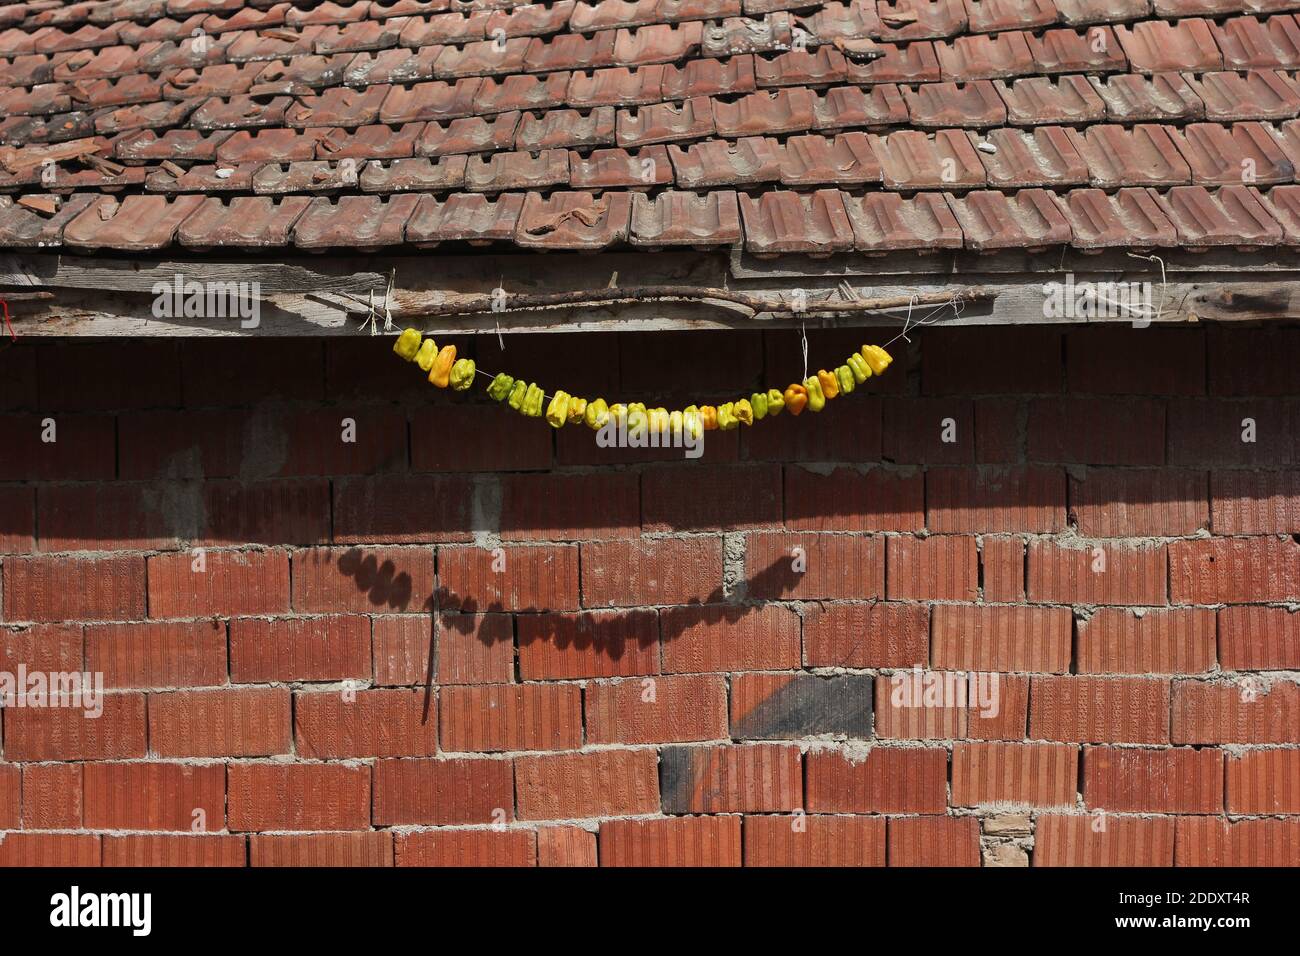 Healthy natural traditional dried vegetables hanging on rural village house wall. Yellow pepper hanged to dry. Cultural food with bright colors. Stock Photo